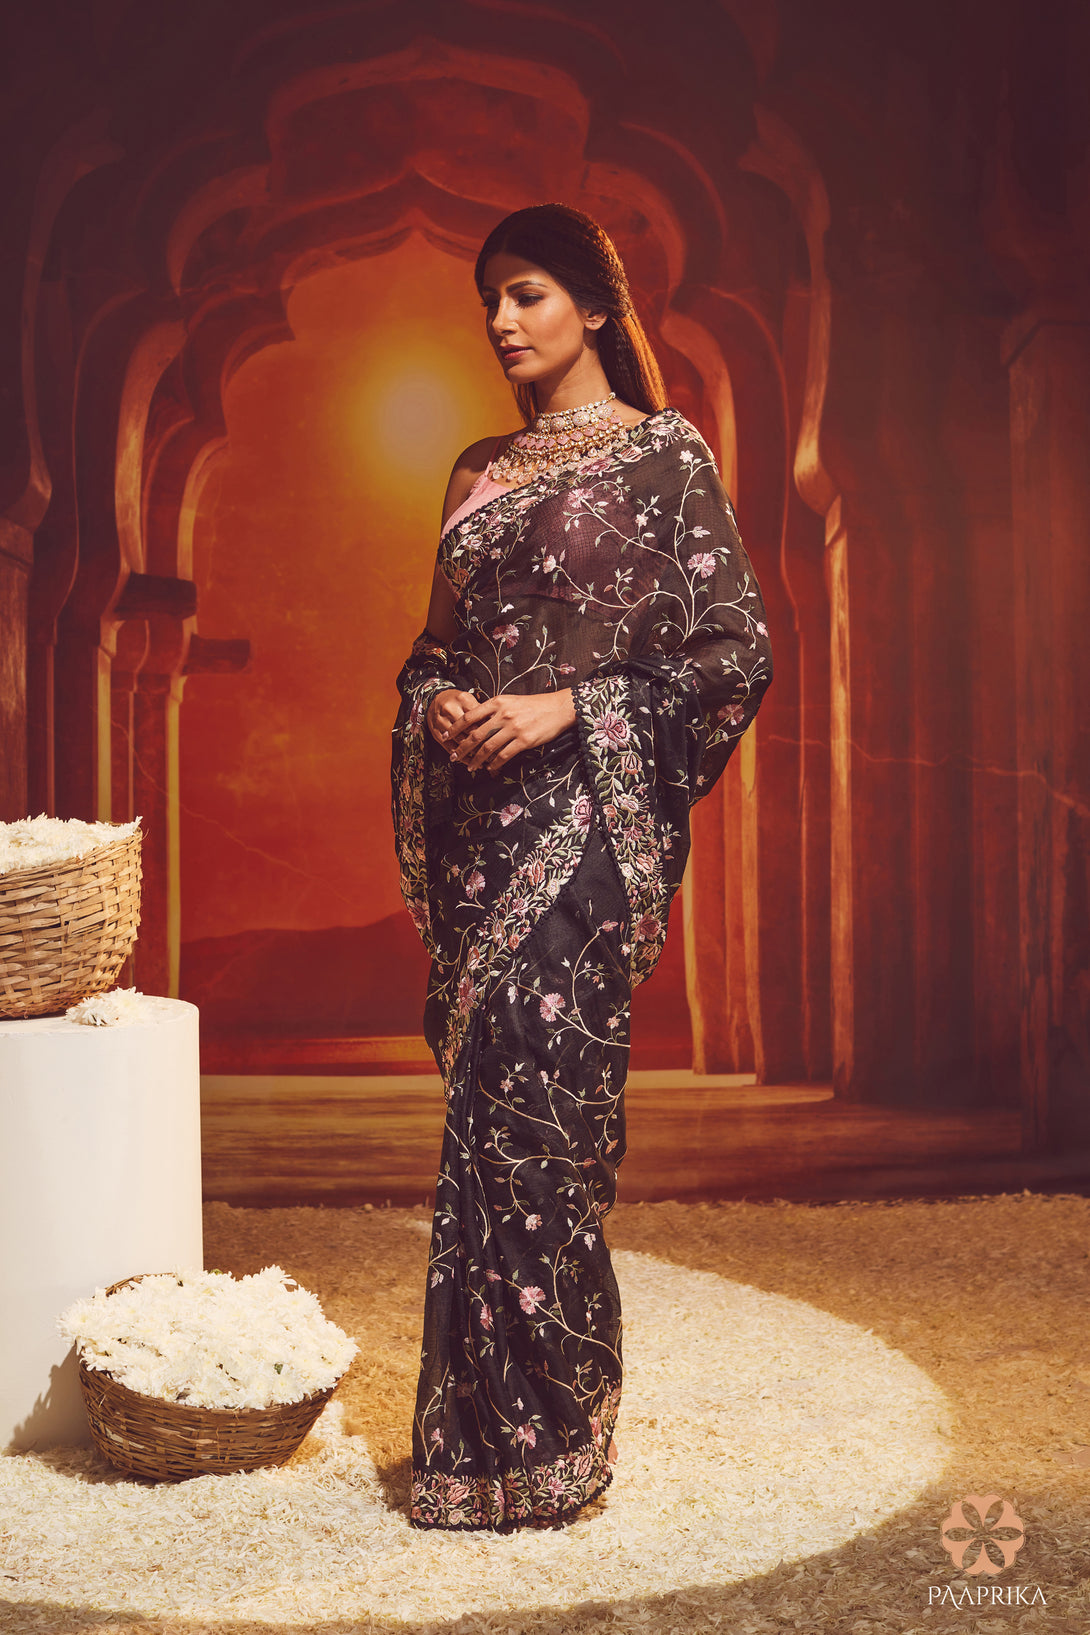 Beautiful drape of the Captivating Black Kota Silk Floral Embroidered Saree, elevating your fashion game with grace. The lightweight and flowy Kota silk fabric drapes effortlessly, showcasing the embroidered floral motifs.